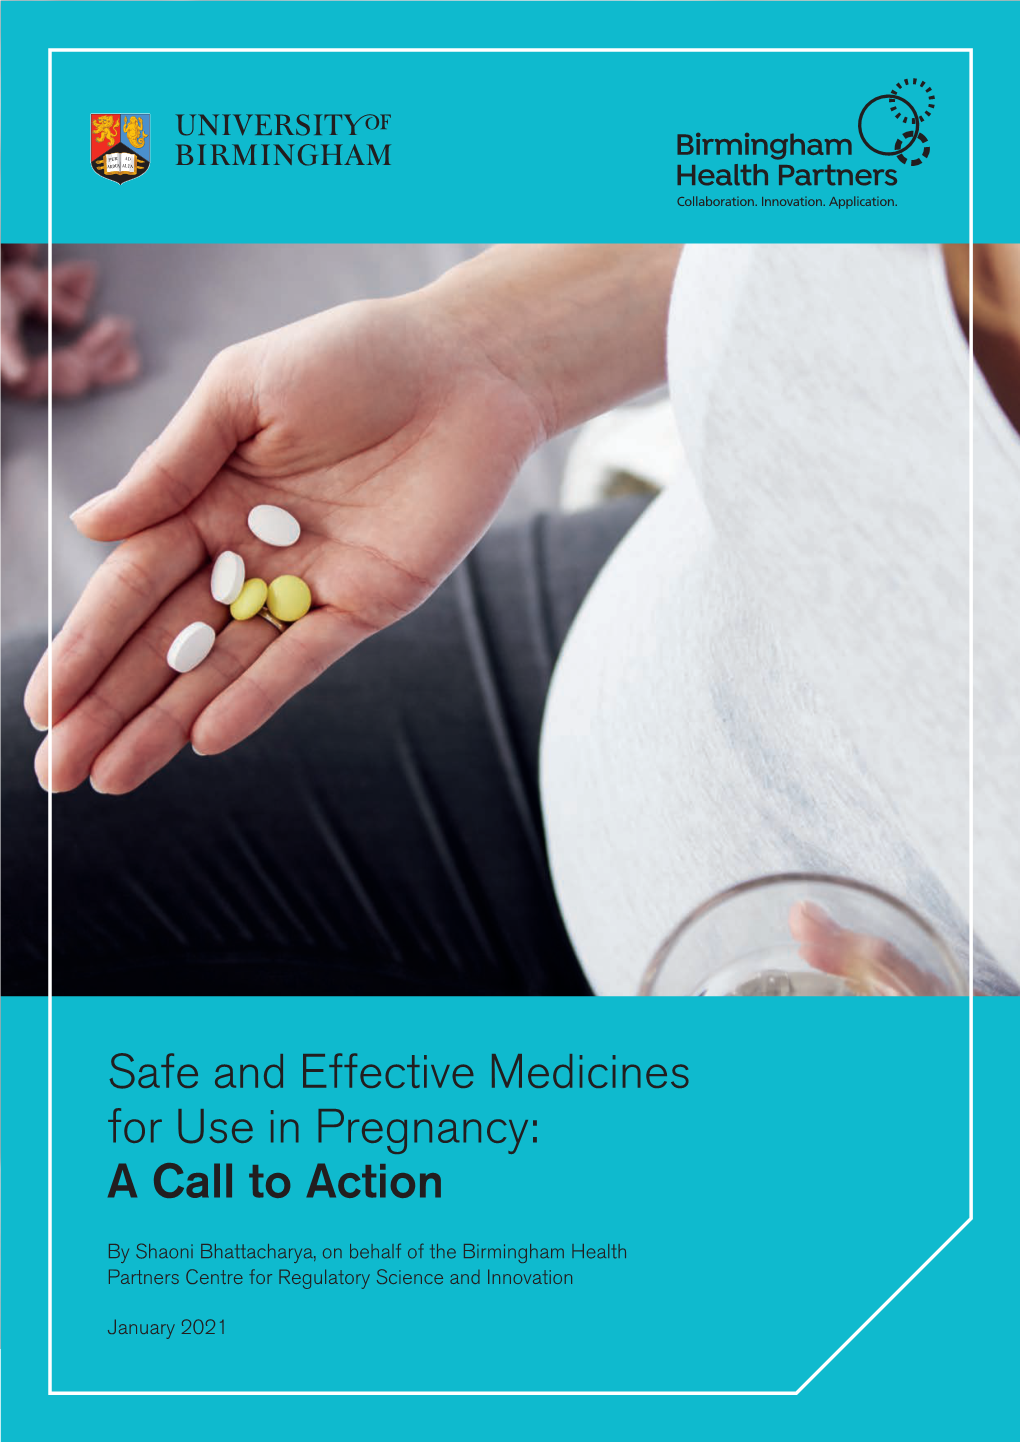 Safe and Effective Medicines for Use in Pregnancy: a Call to Action